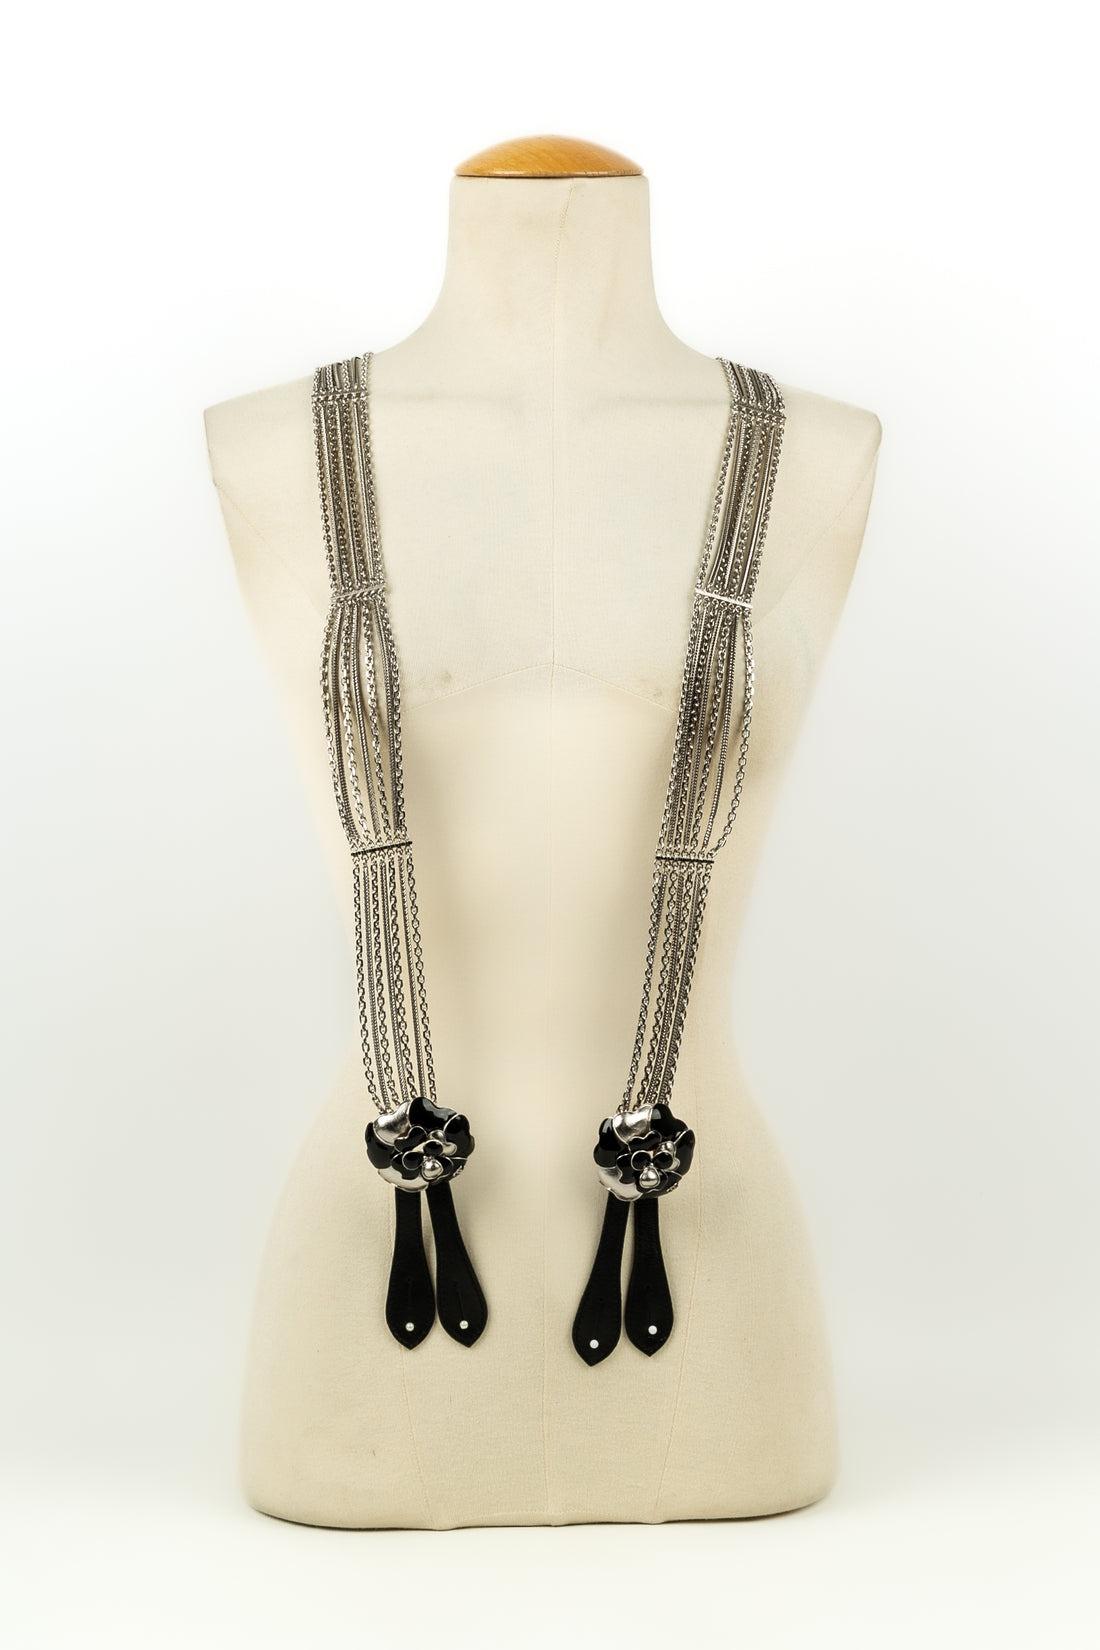 Chanel Straps in Silver Chain, Black Leather and Camellia Spring, 2007 For Sale 5